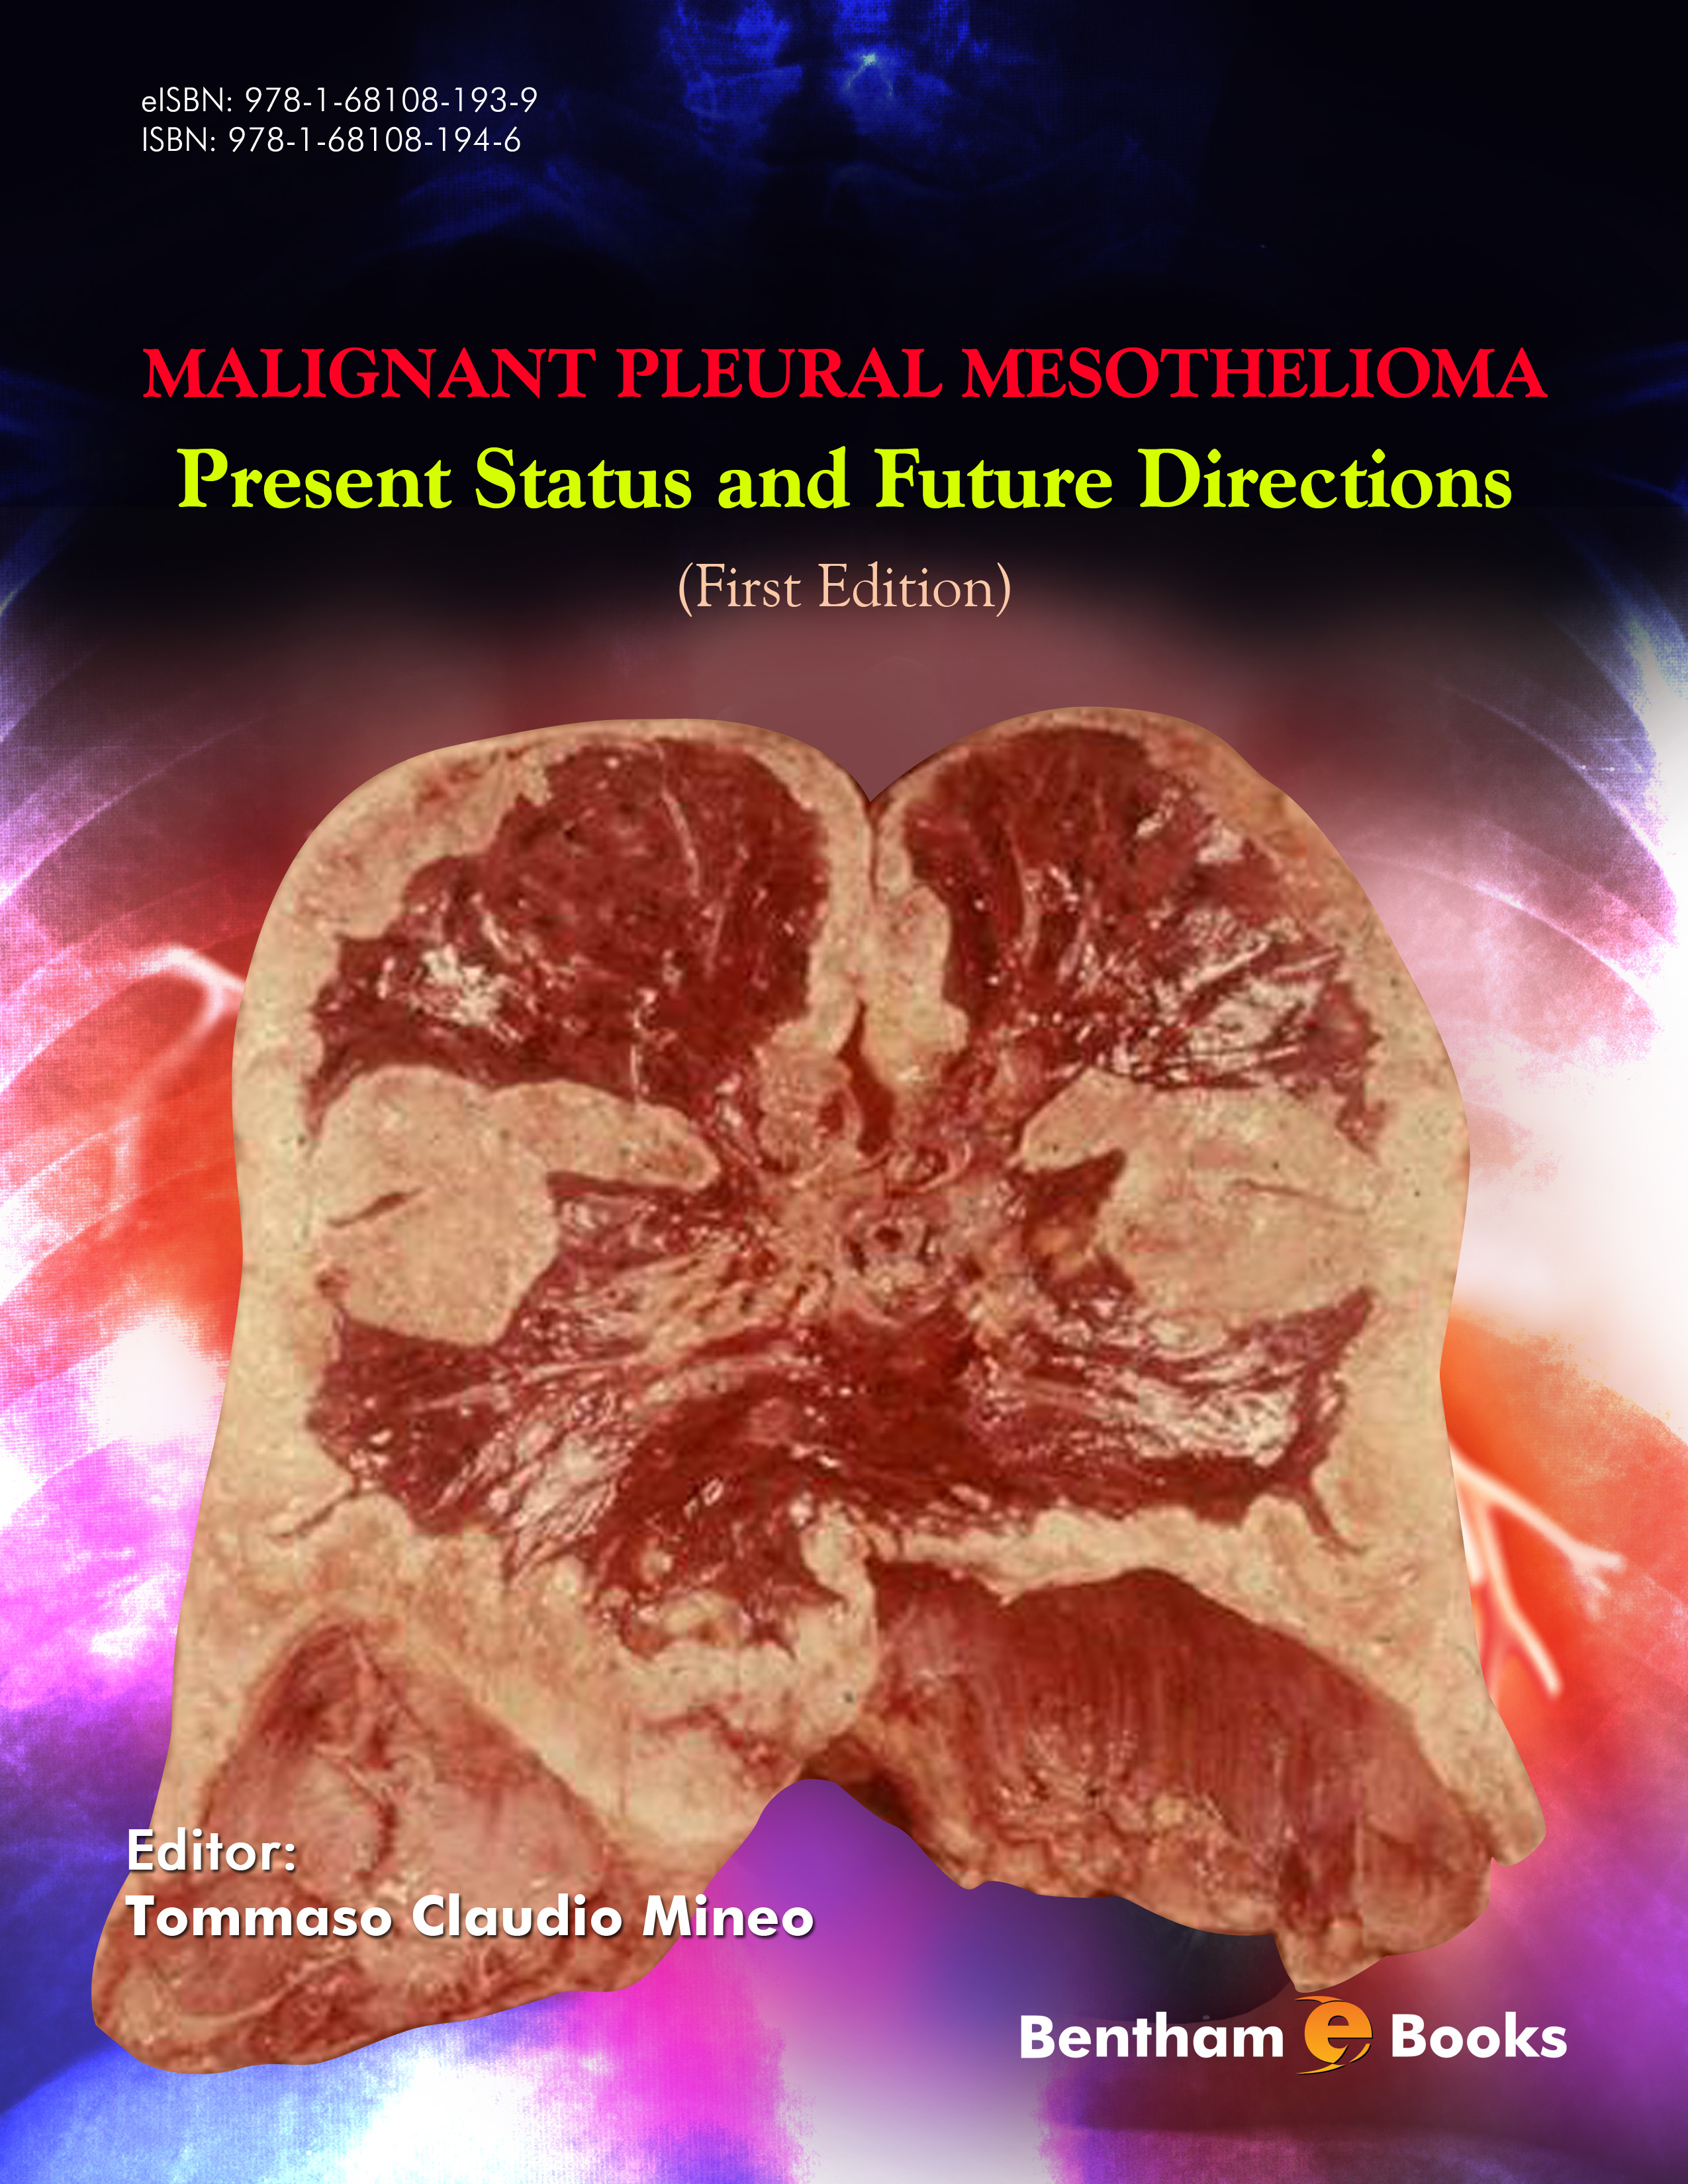 Malignant Pleural Mesothelioma: Present Status and Future Directions